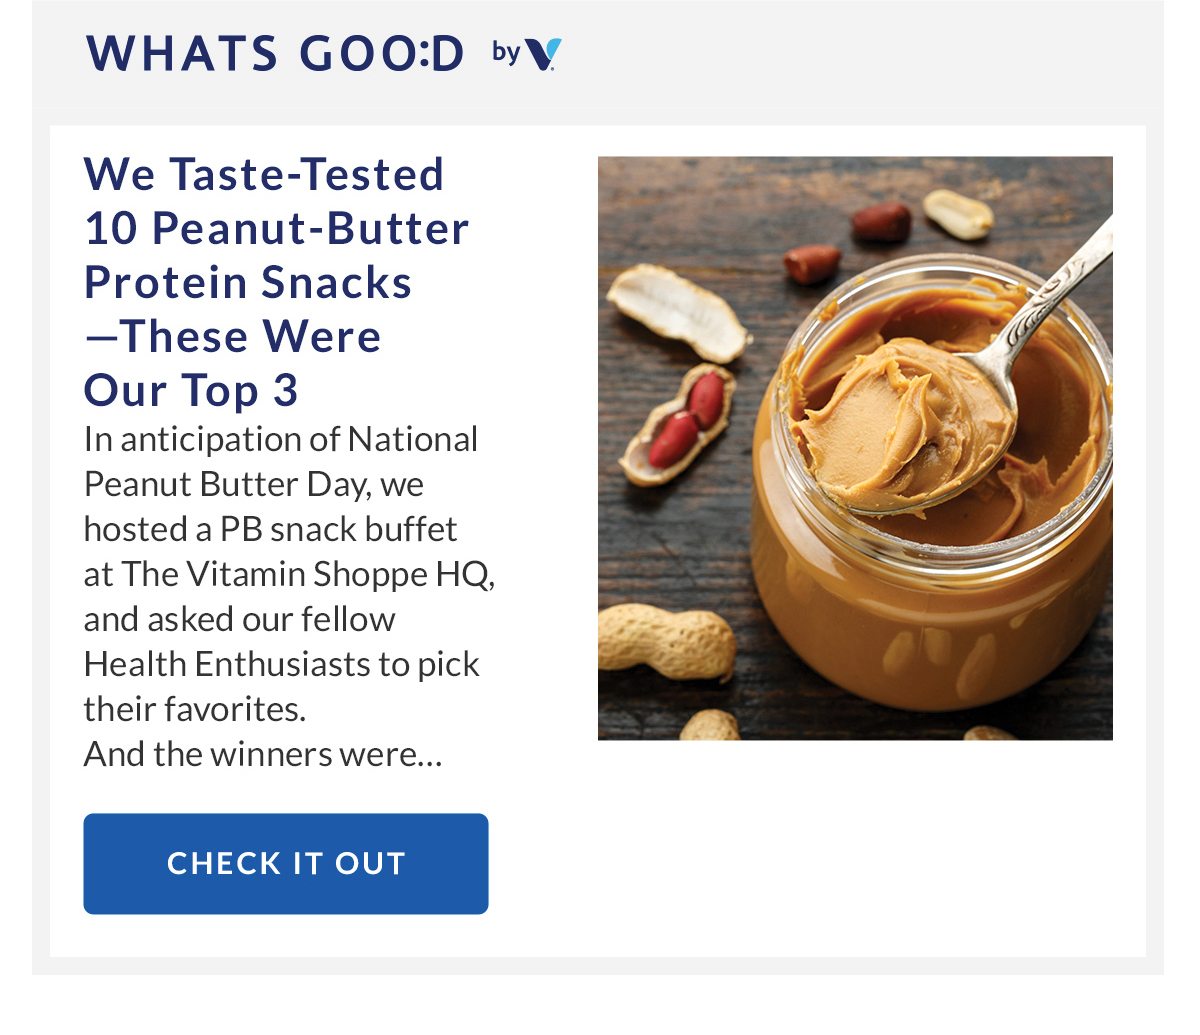 WHATS GOO:D | We Taste-Tested 10 Peanut-Butter Protein Snacks - These Were Our Top 3 | In anticipation of National Peanut Butter Day, we hosted a PB snack buffet at The Vitamin Shoppe HQ, and asked our fellow Health Enthusiasts to pick their favorites. And the winners were... | CHECK IT OUT